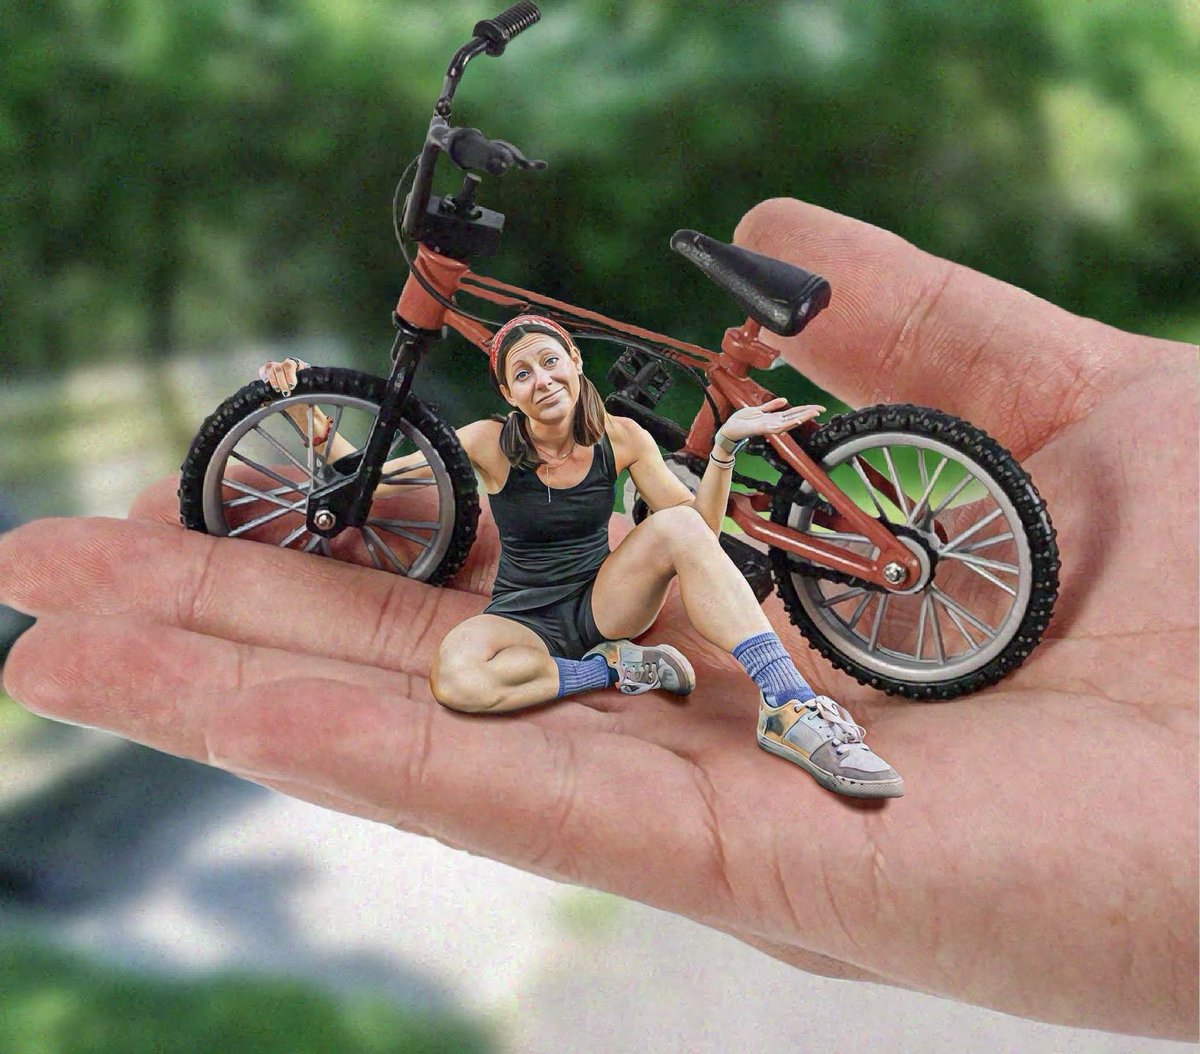 How do you one up from riding across America on a triplet tandem? Why you do it again at 1/12th scale! Though it does make interacting with people a bit more interesting…

#bicycle #stuartlittle #karaandnate #miniature #cute #pigtails